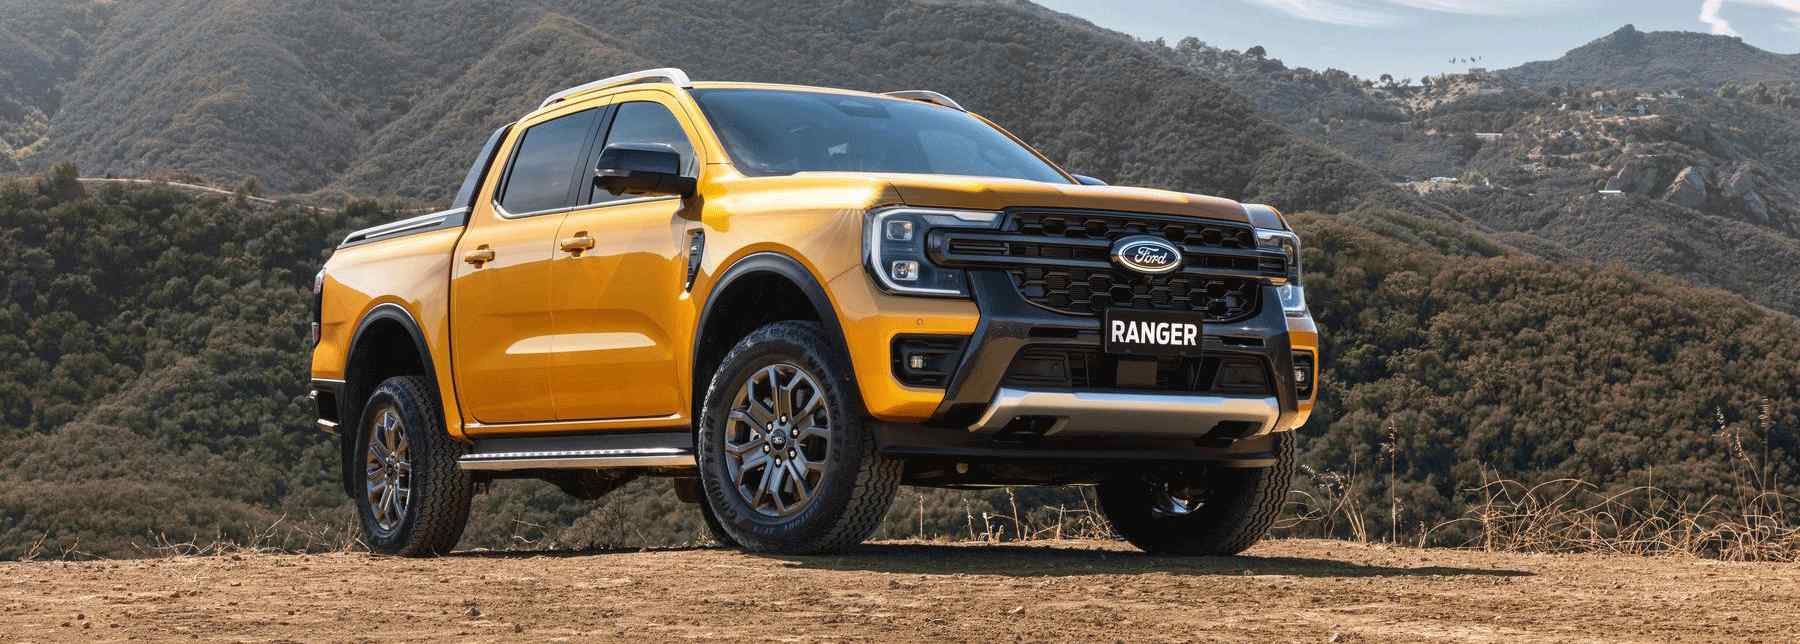 Ford unveils the next generation Ranger